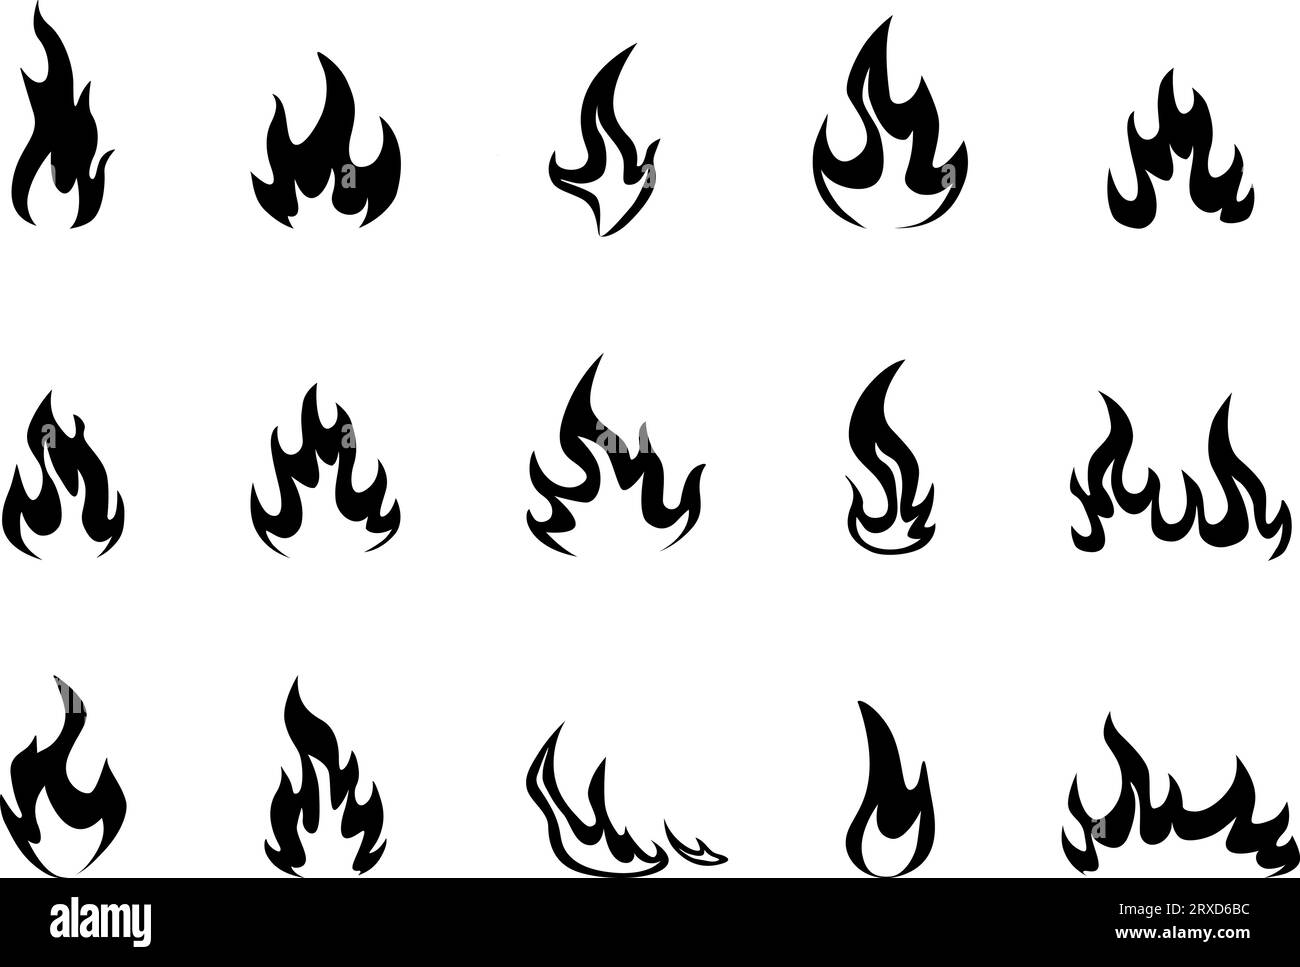 Blackfire icons. Black flames and fire silhouettes, grill hot symbols. Combustible substance fiery logo, monochrome flaming nowaday vector set Stock Vector